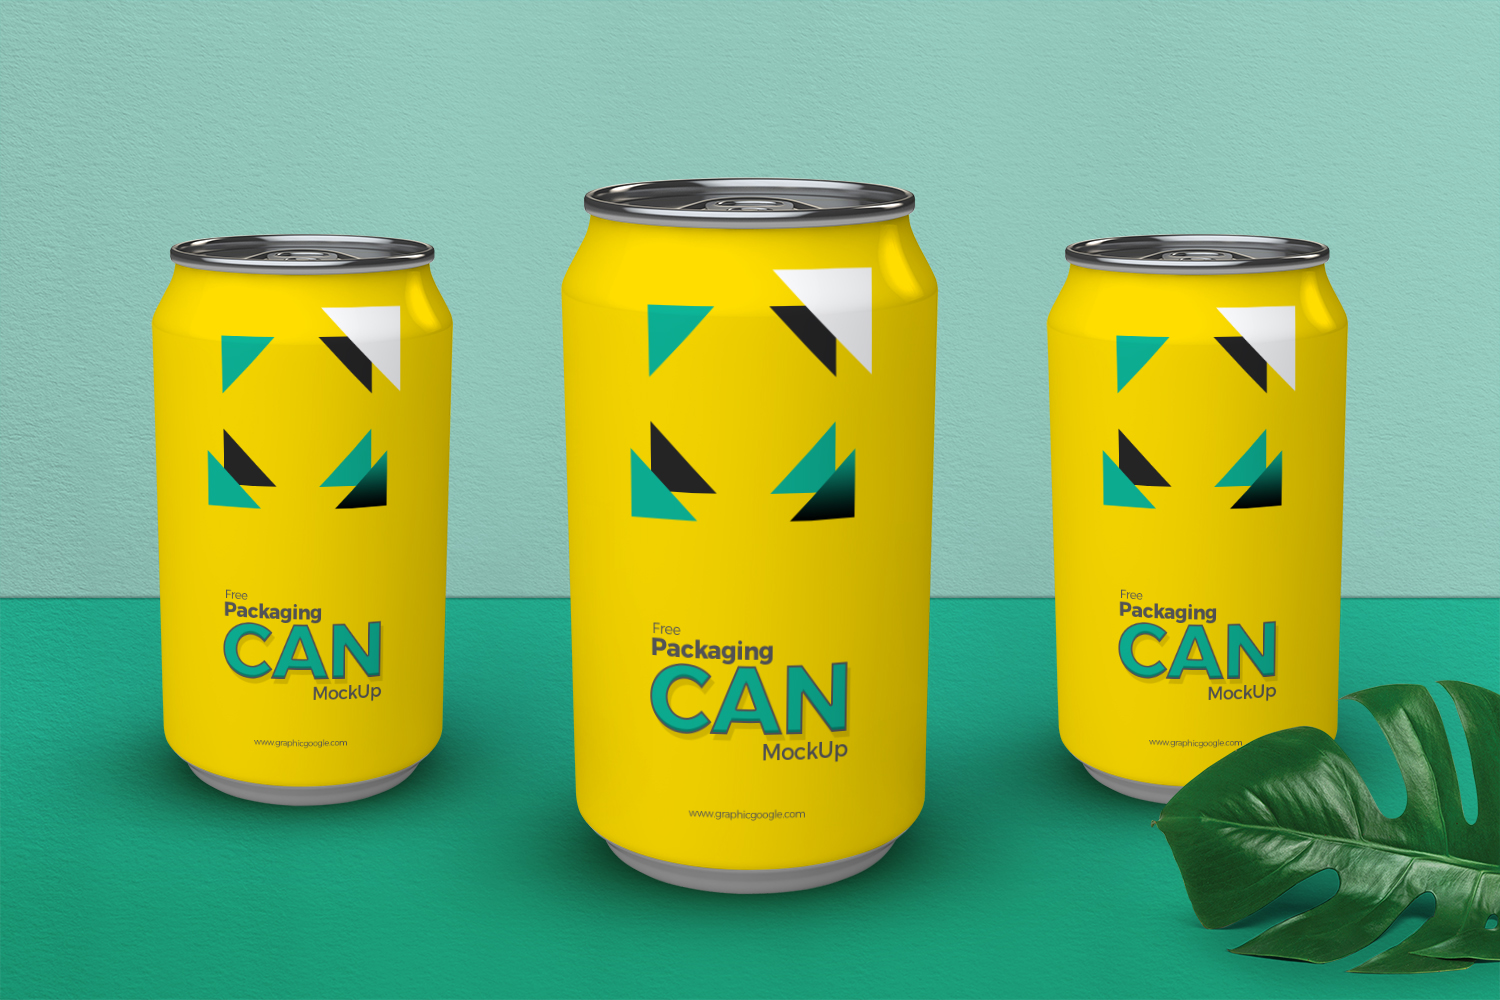 Free Packaging Can Mockup PSD